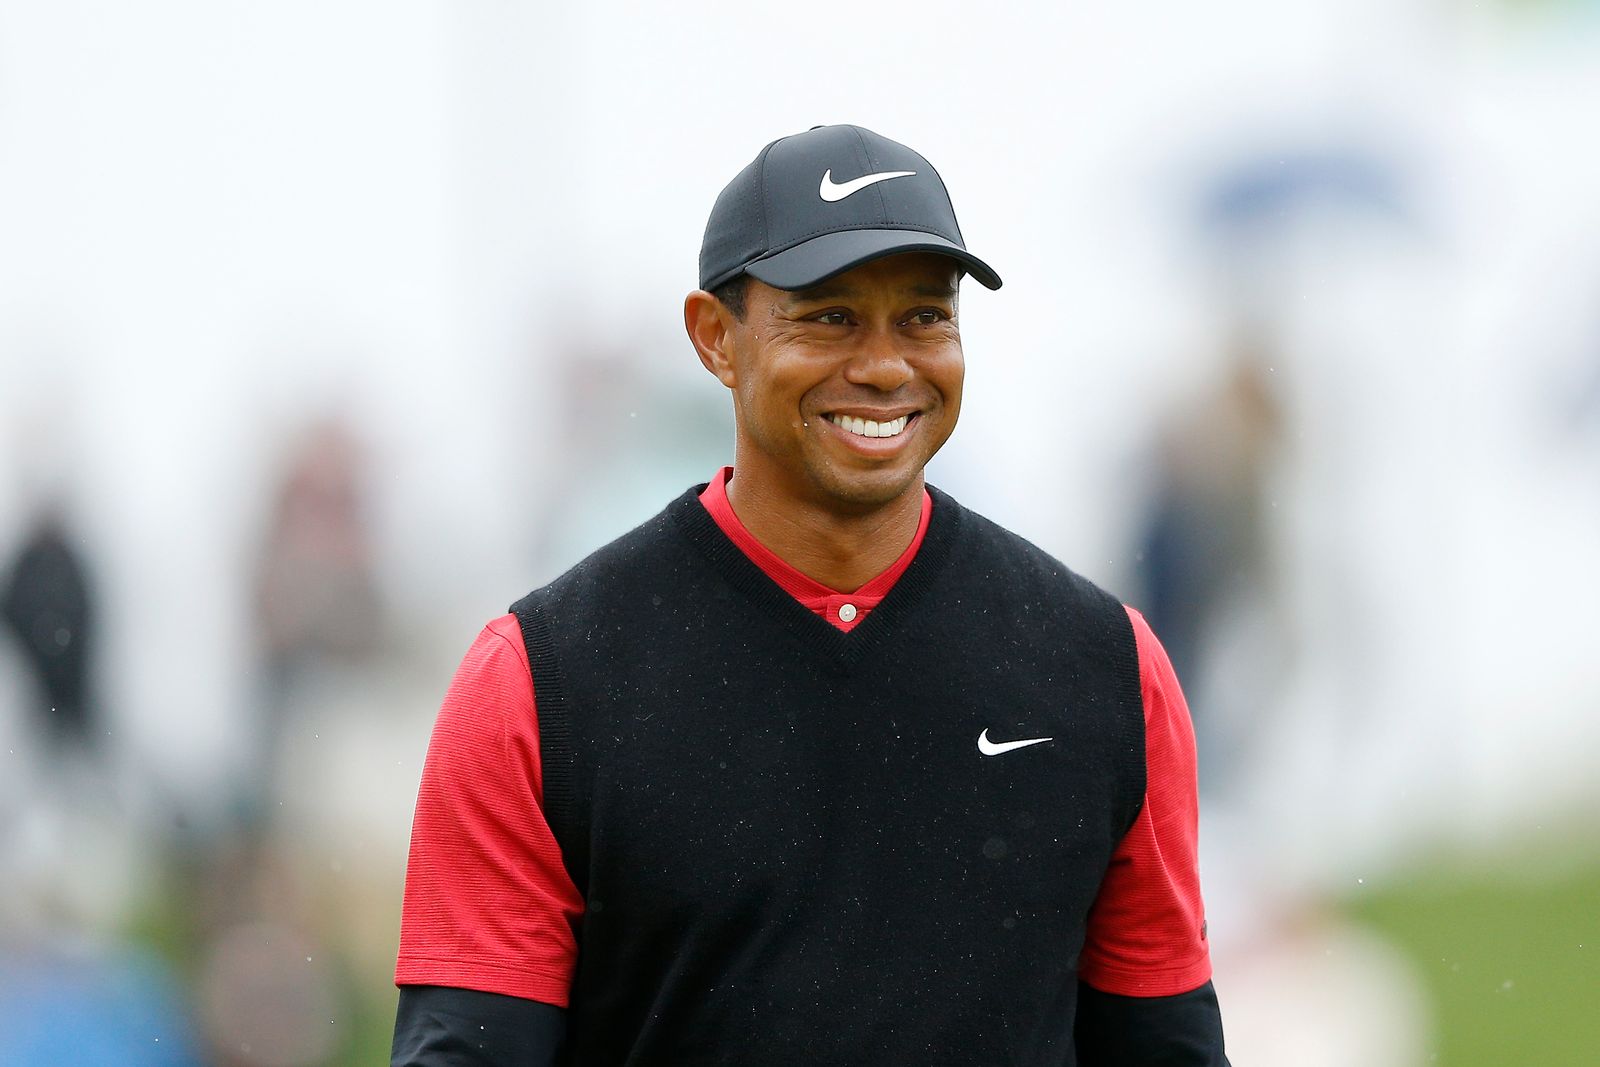 Tiger Woods' reaction after chipping in from the bunker on the third hole during the final round of The PLAYERS Championship at TPC Sawgrass on March 17, 2019 | Photo: Getty Images